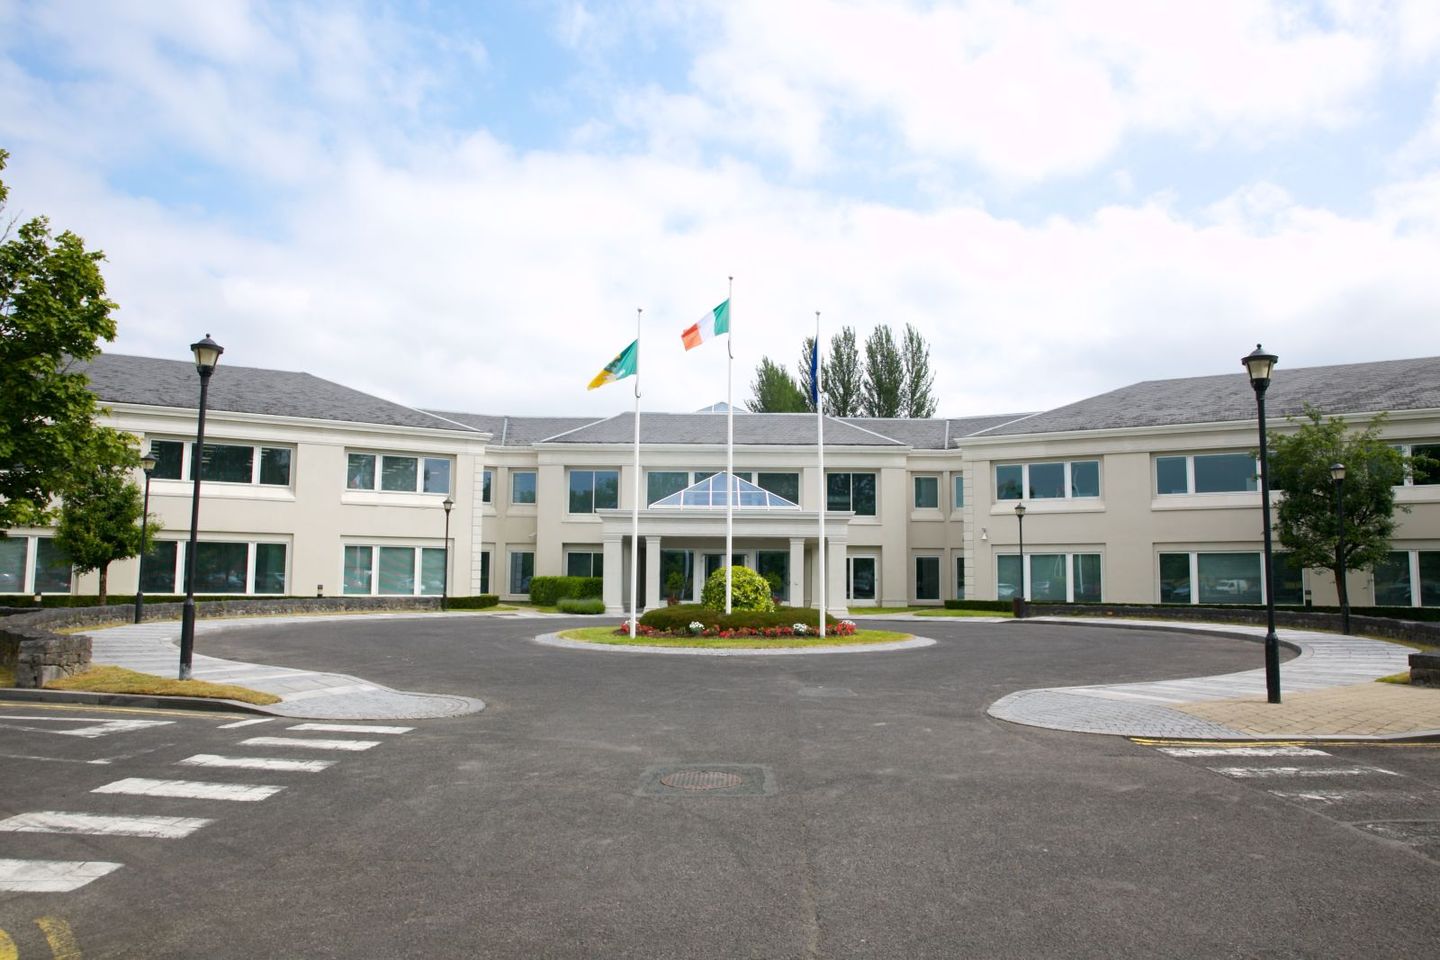 Carrick Business Campus, Attifinlay, Carrick-on-shannon, Carrick-on-Shannon, Co. Leitrim